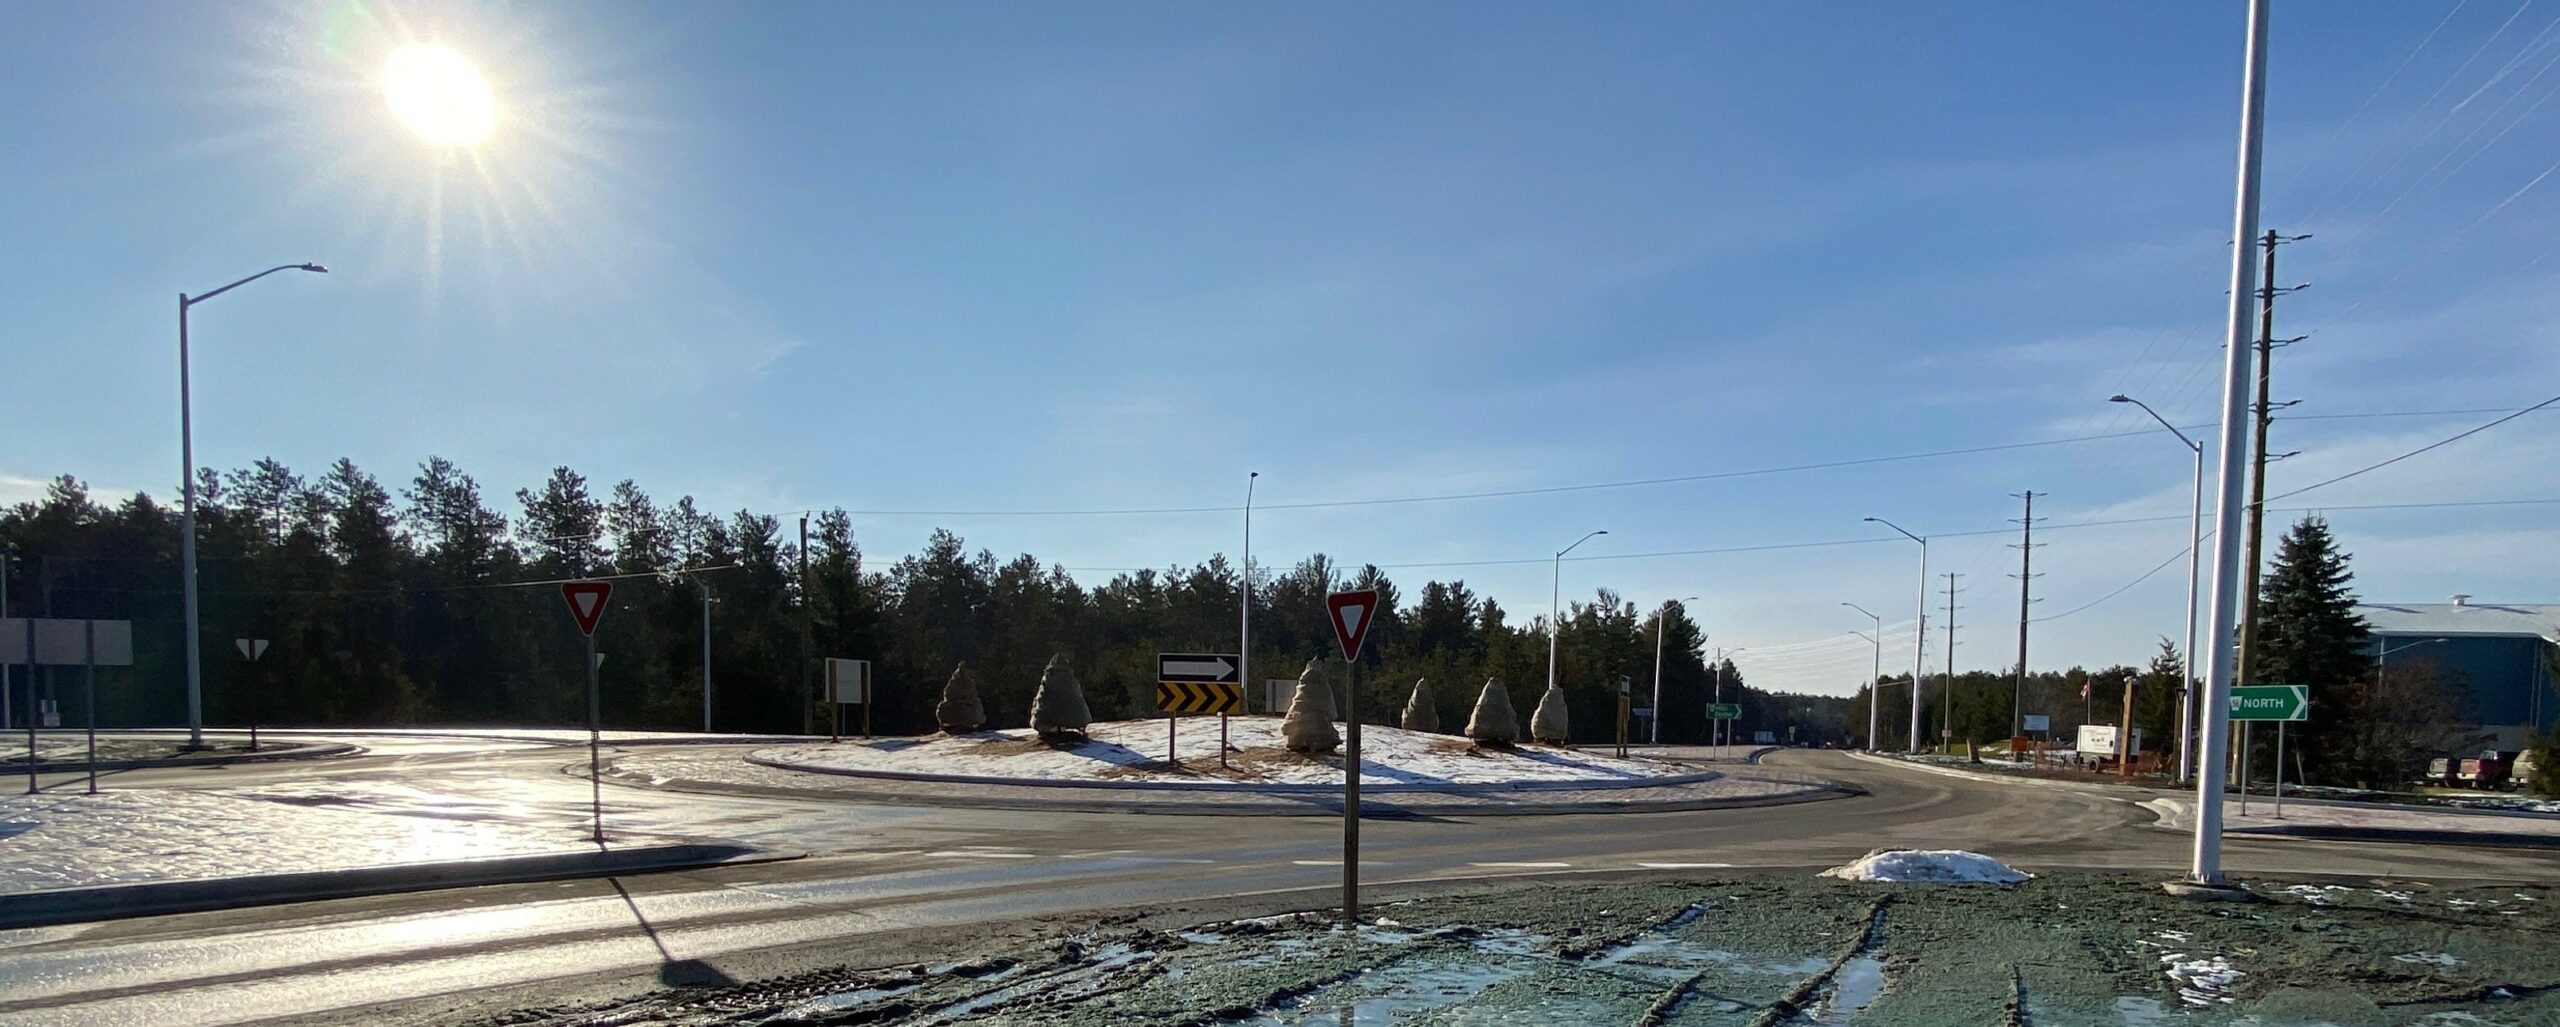 County Road 56 and 21 Roundabout Background Image